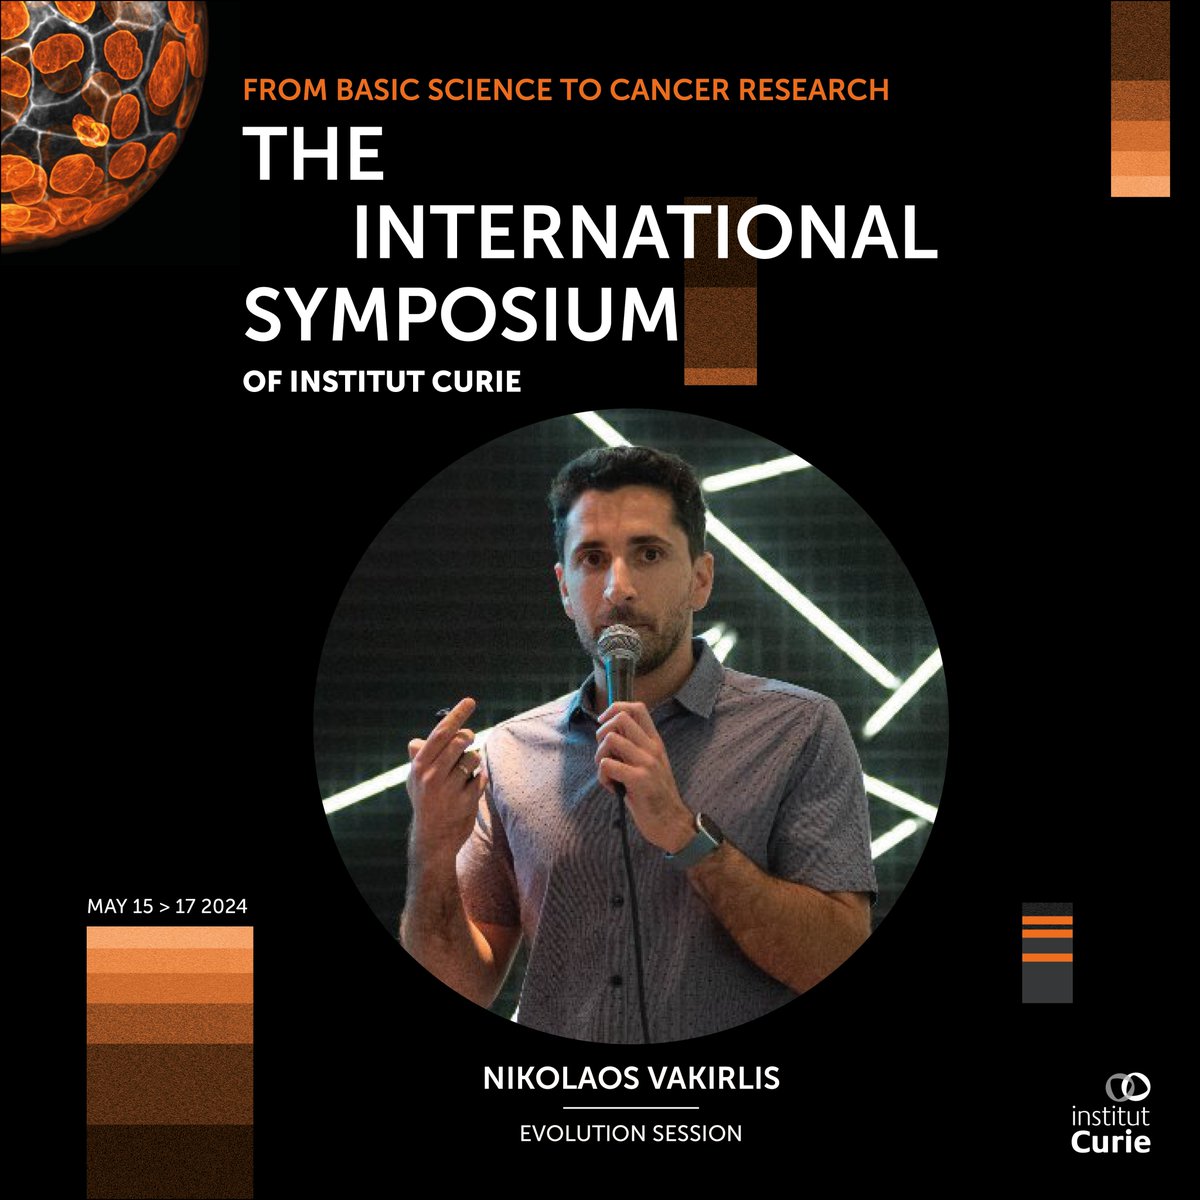 Dive into the evolution session at the 1st International Symposium of @institut_curie, happening from May 15 to 17 at @Maison_Chimie and meet the expert @vakirlis who will give a talk on 'De novo evolution of human microproteins'. #CurieSymposium ➡️ curiesymposium.fr/registration